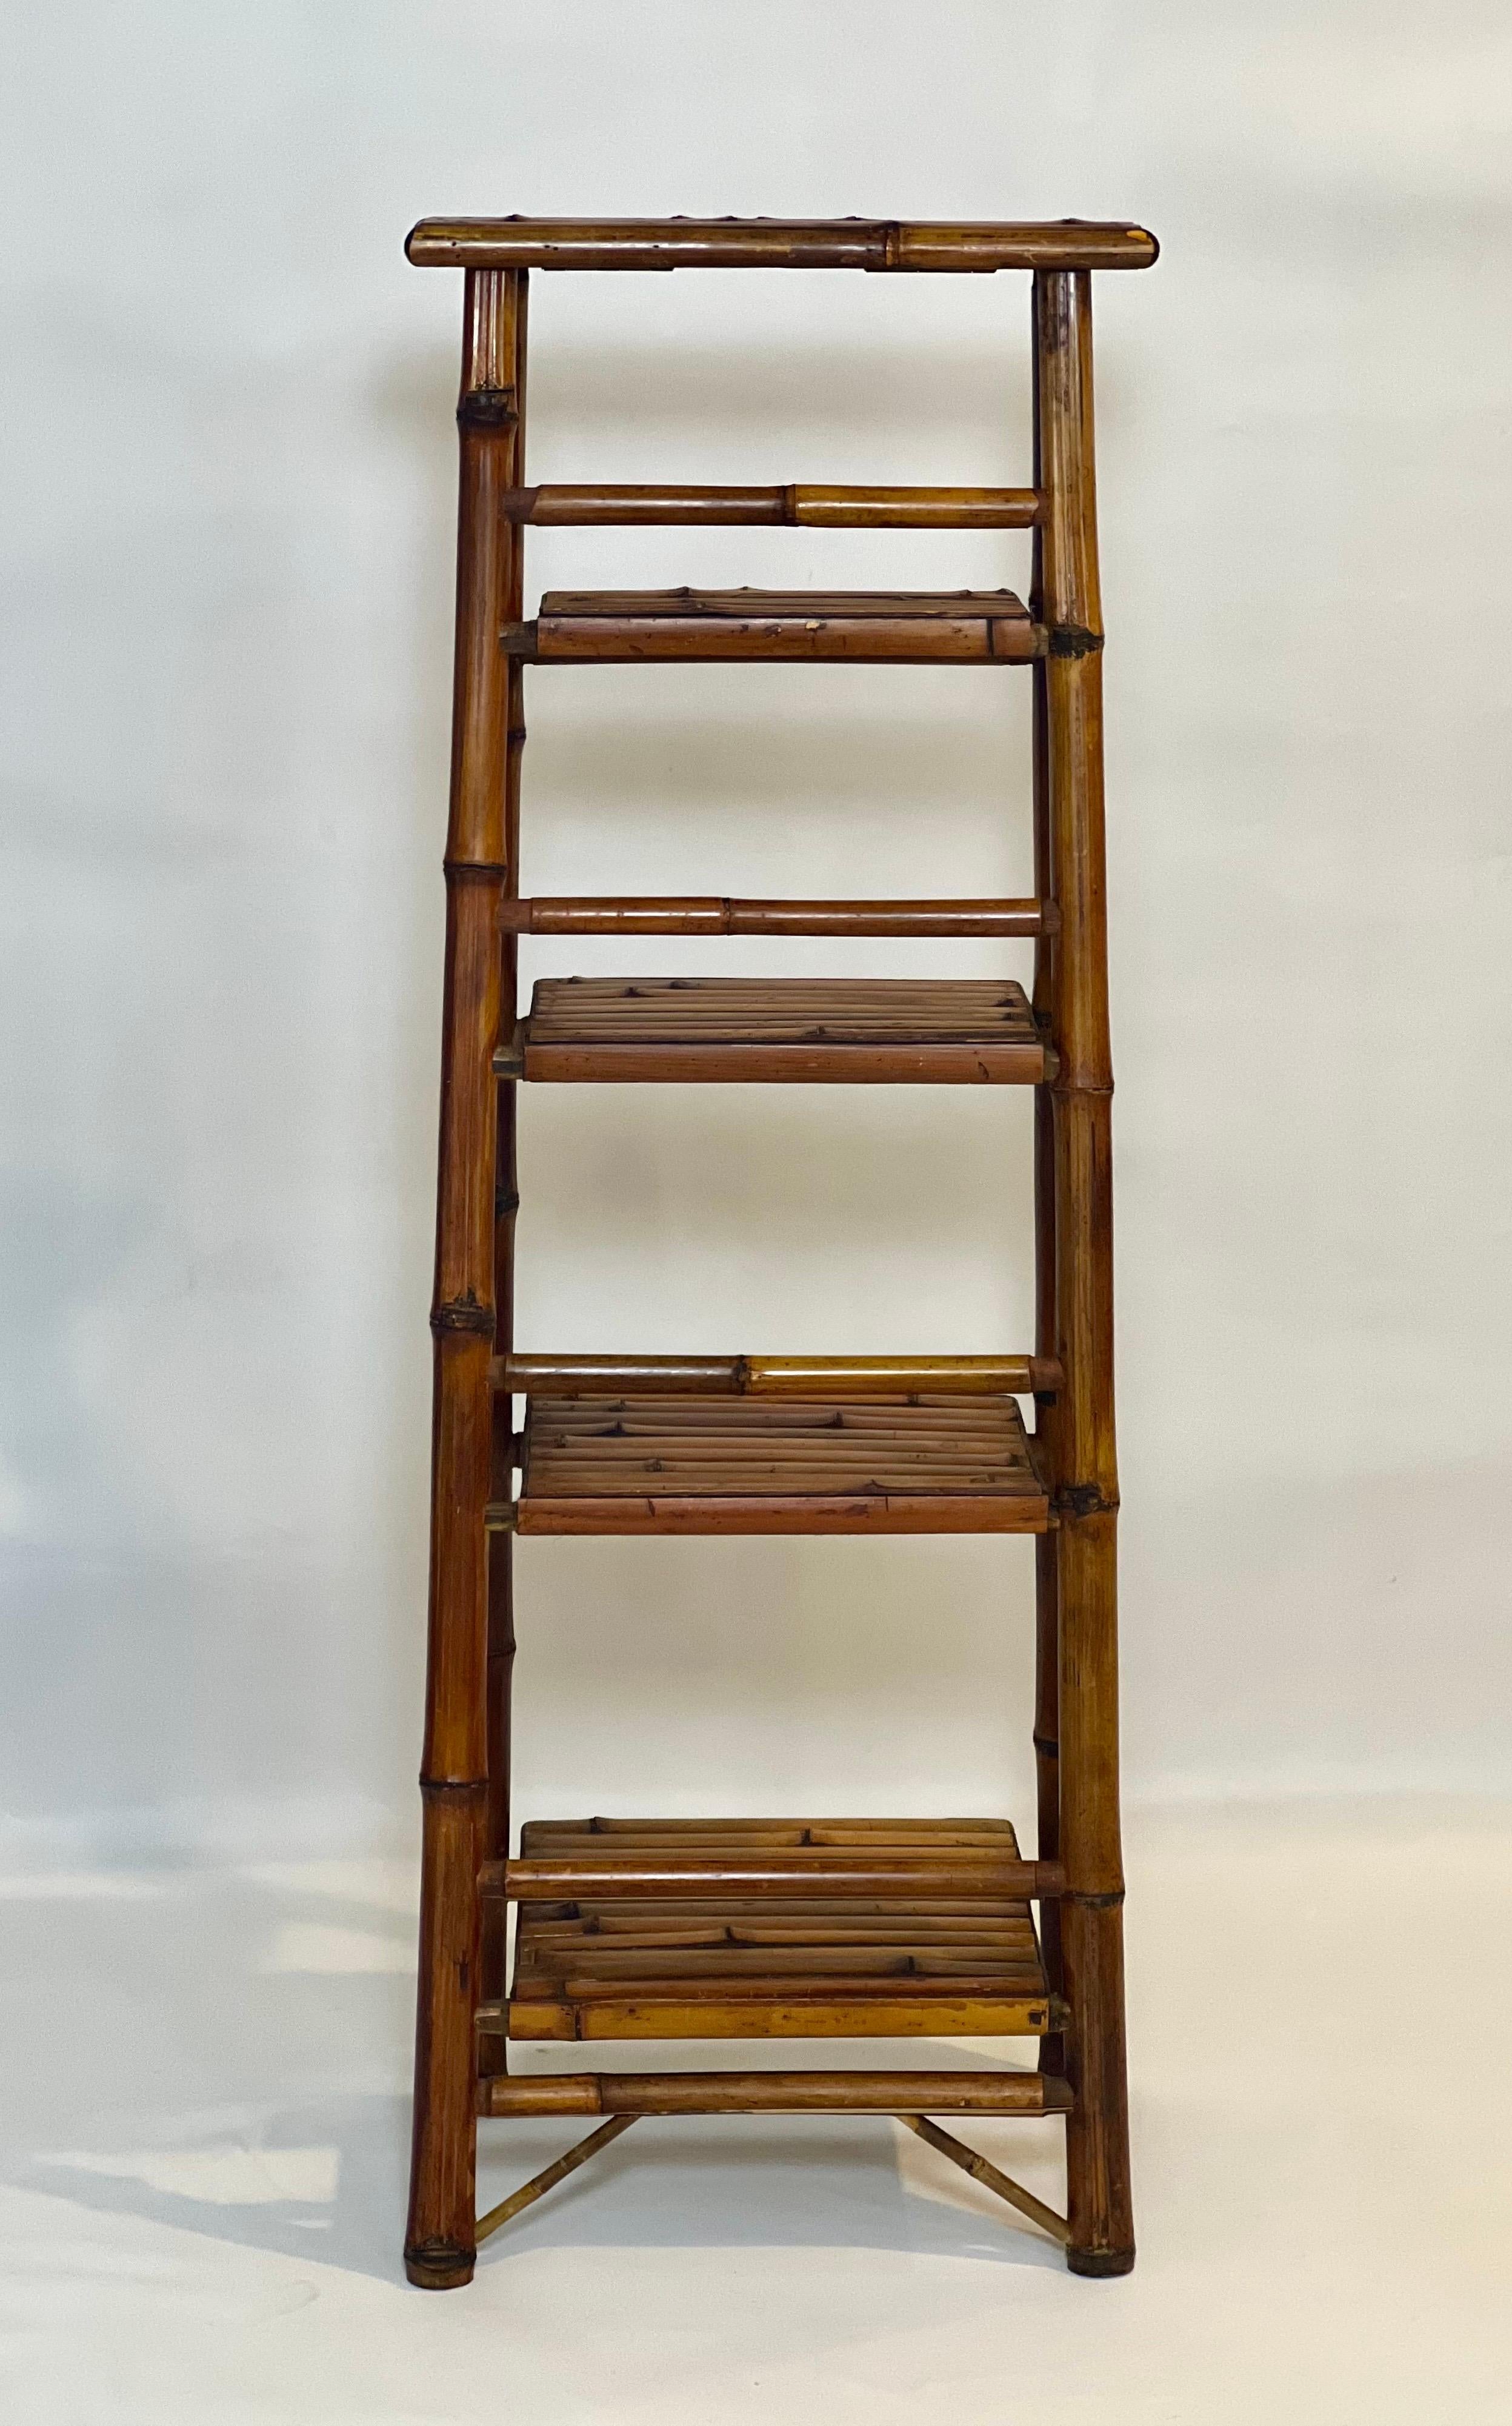 20th Century Vintage Bamboo A-Frame Etagere or Book Stand